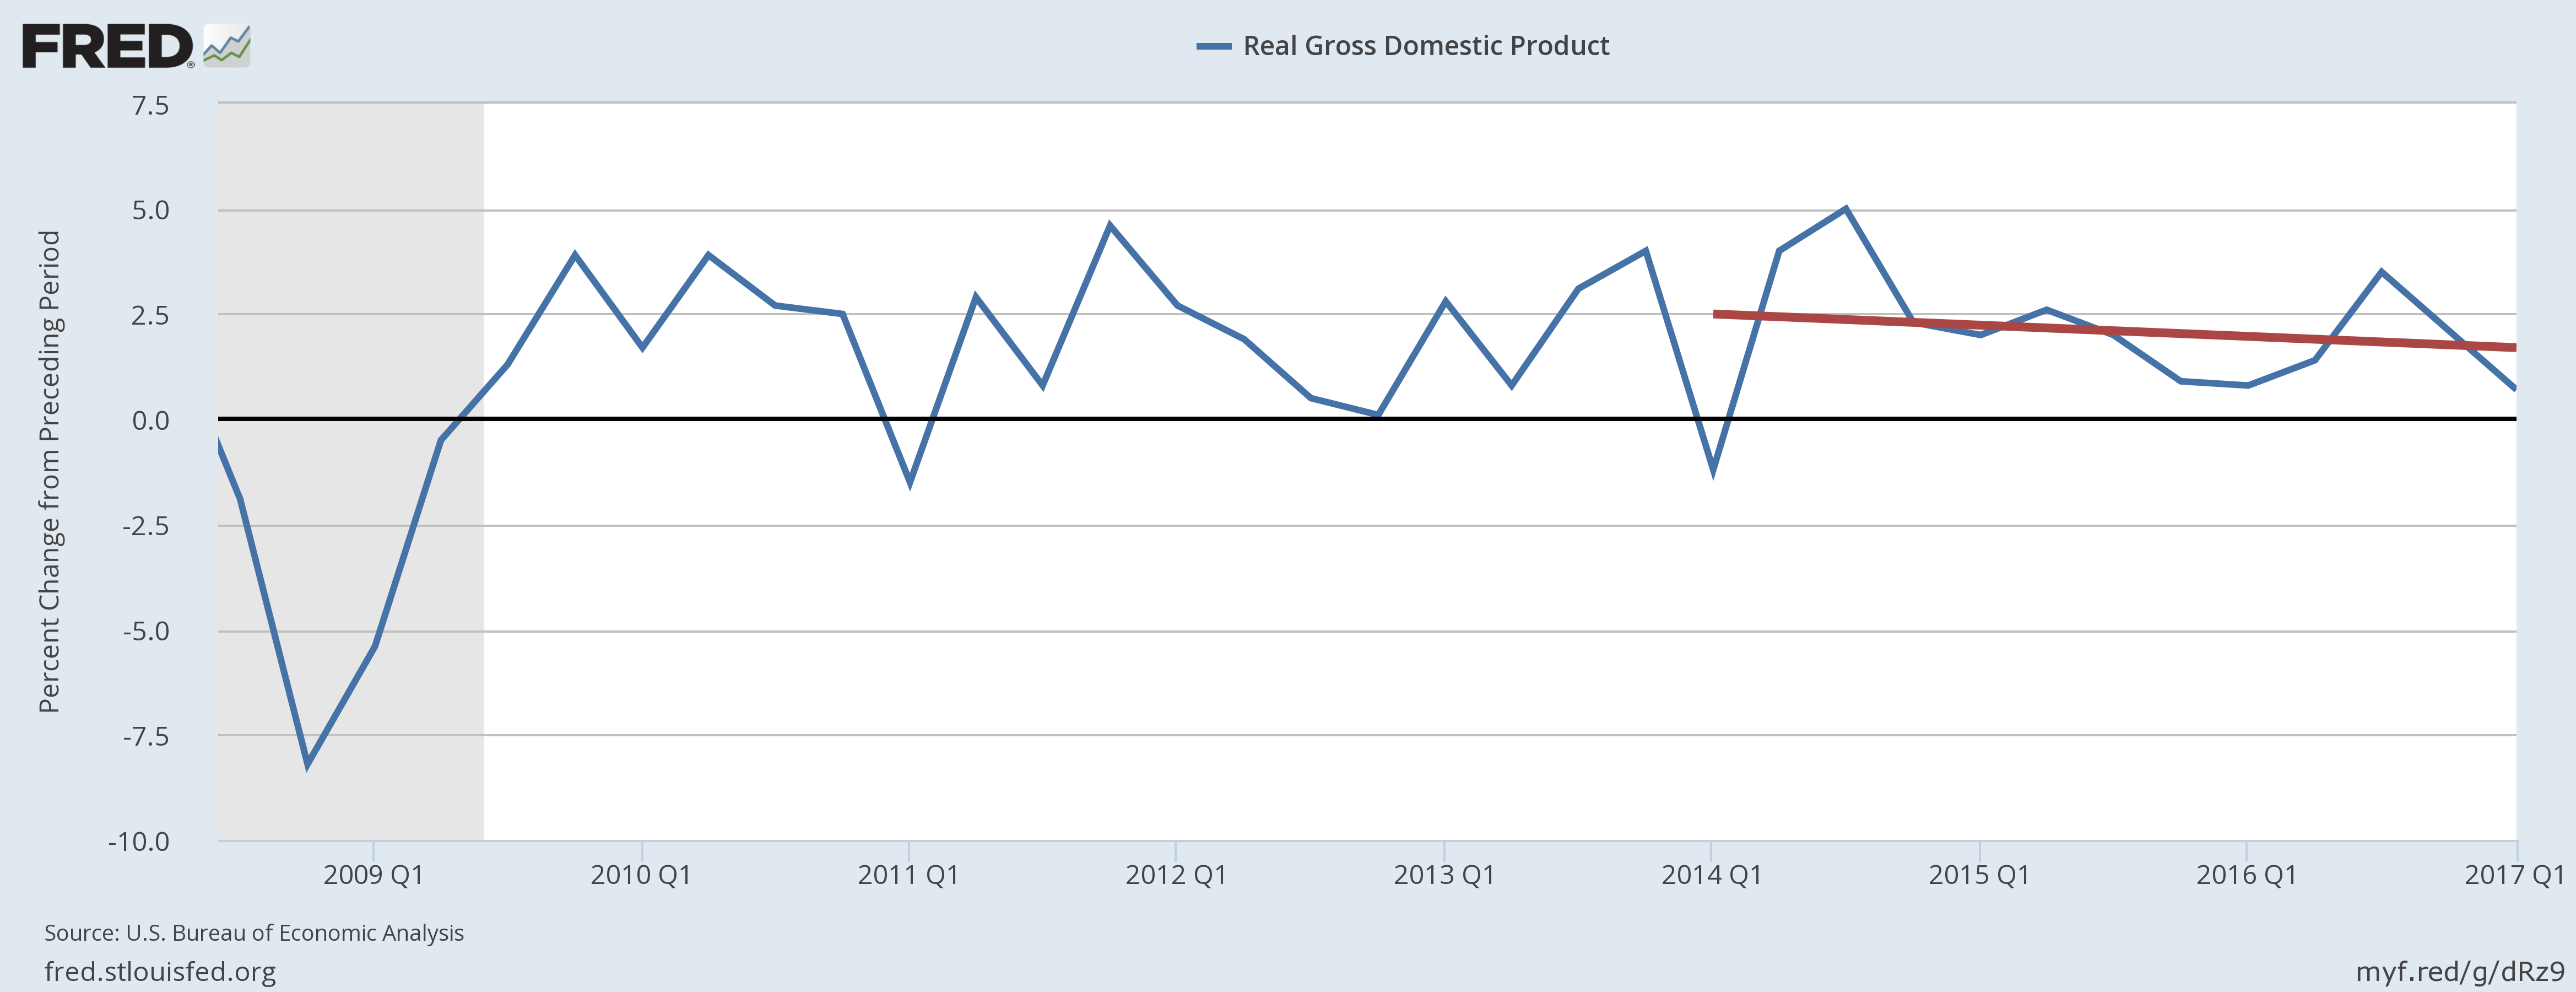 Alas! Real GDP growth is still trending downwards.